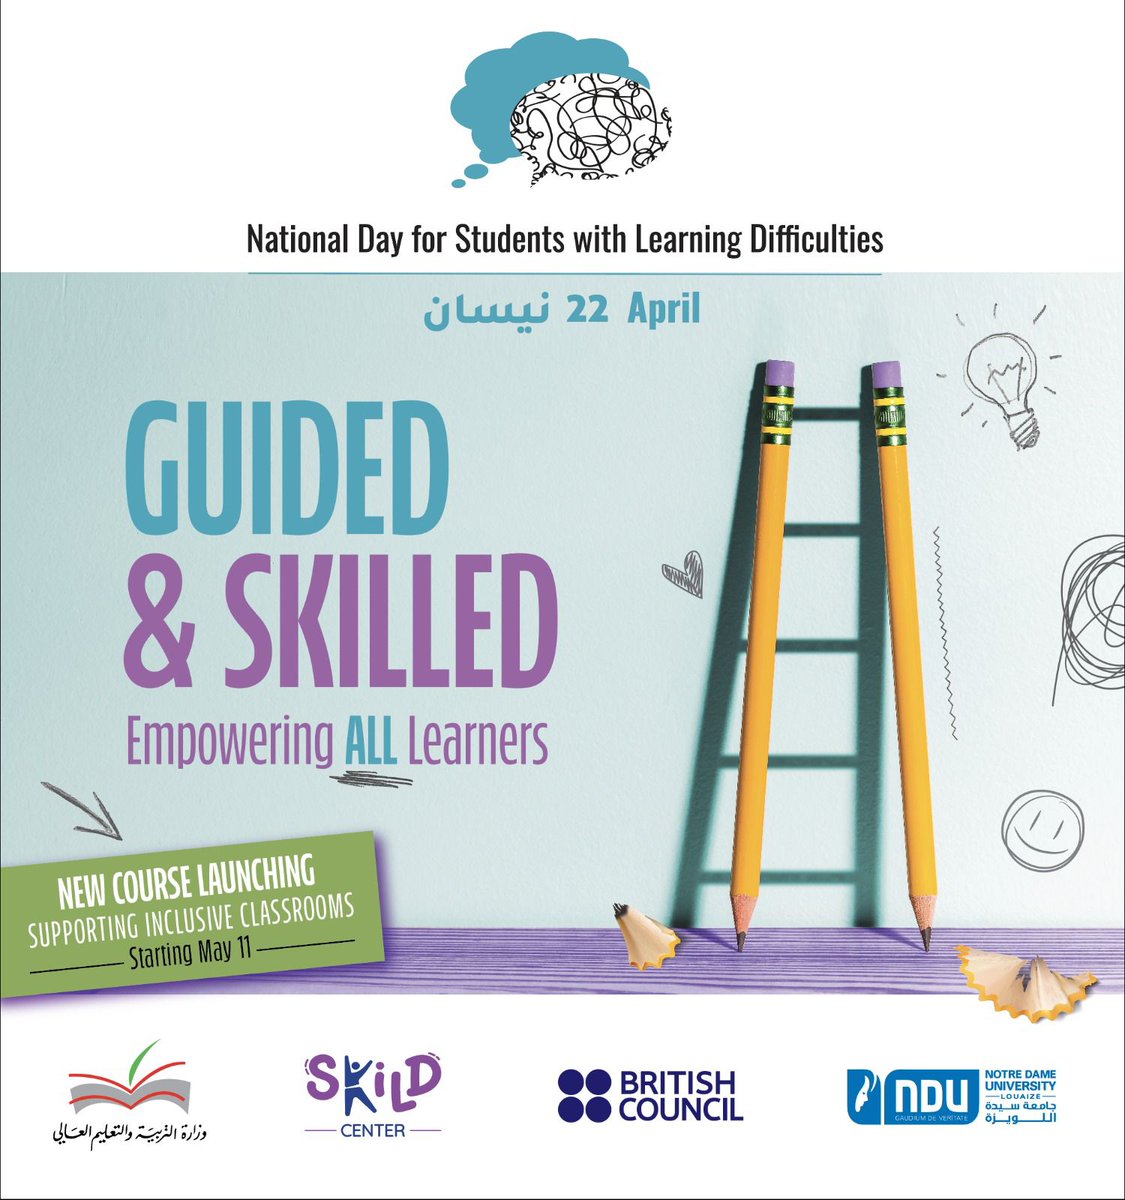 Thrilled to continue a partnership with @MeheLebanon and @SkildCenter for the #NationalDayForStudentswithLearningDifficulties on April 22nd! Together, let's create a more inclusive and accessible world for all. #SchoolsConnect #InclusionMatters #80YearsInLebanon @DawiMayssa